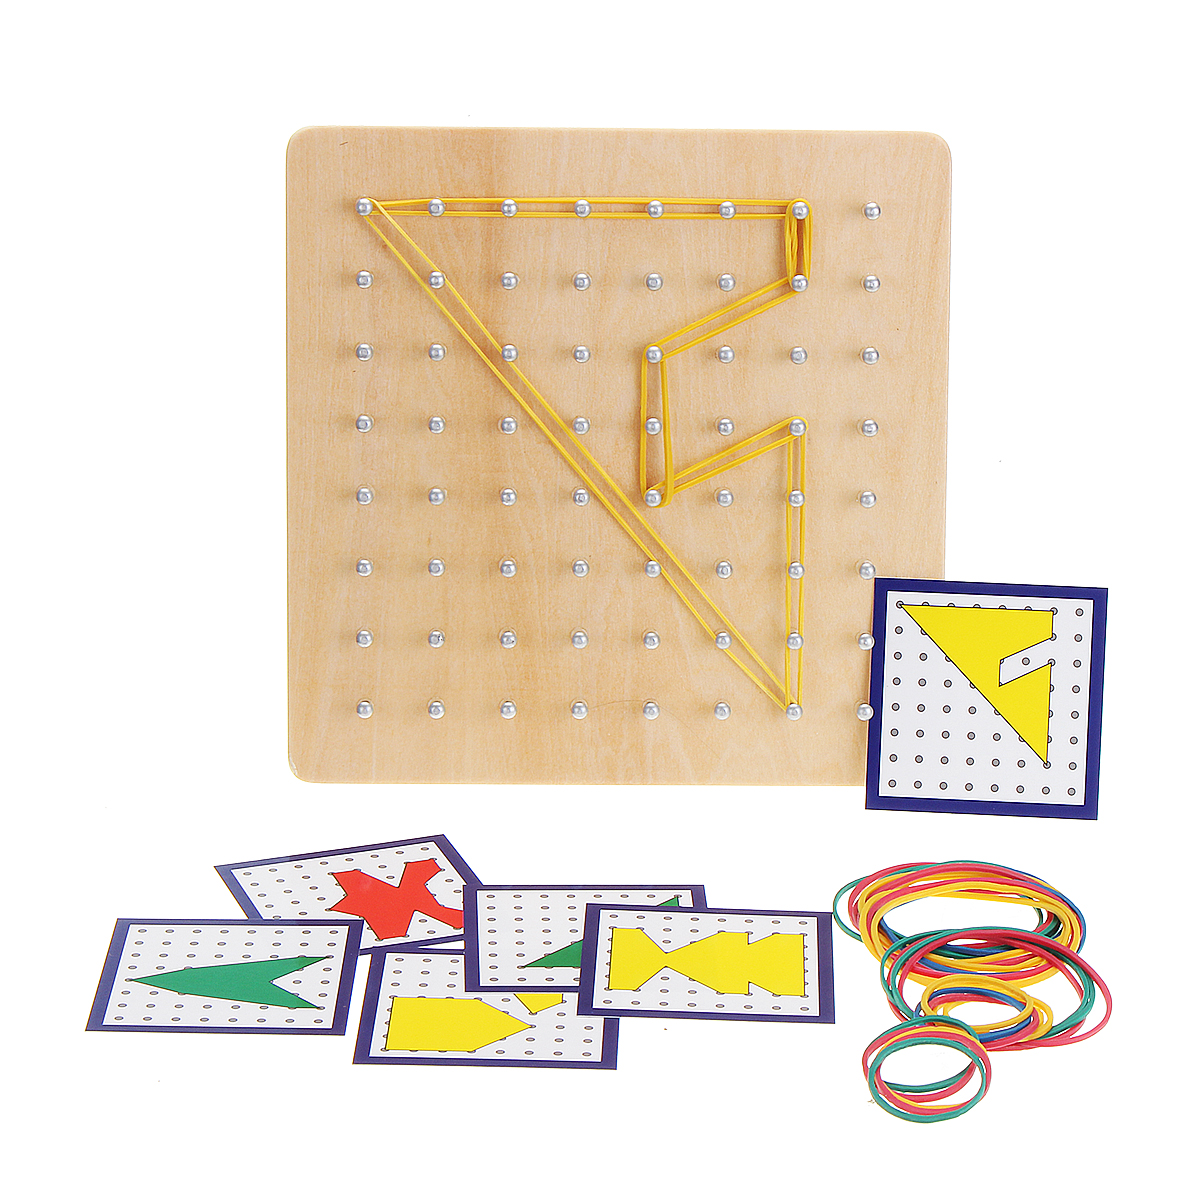 Wooden-Nail-Board-Plate-Kids-Mathematics-Geometry-Space-Educational-Children-Toy-1708640-4